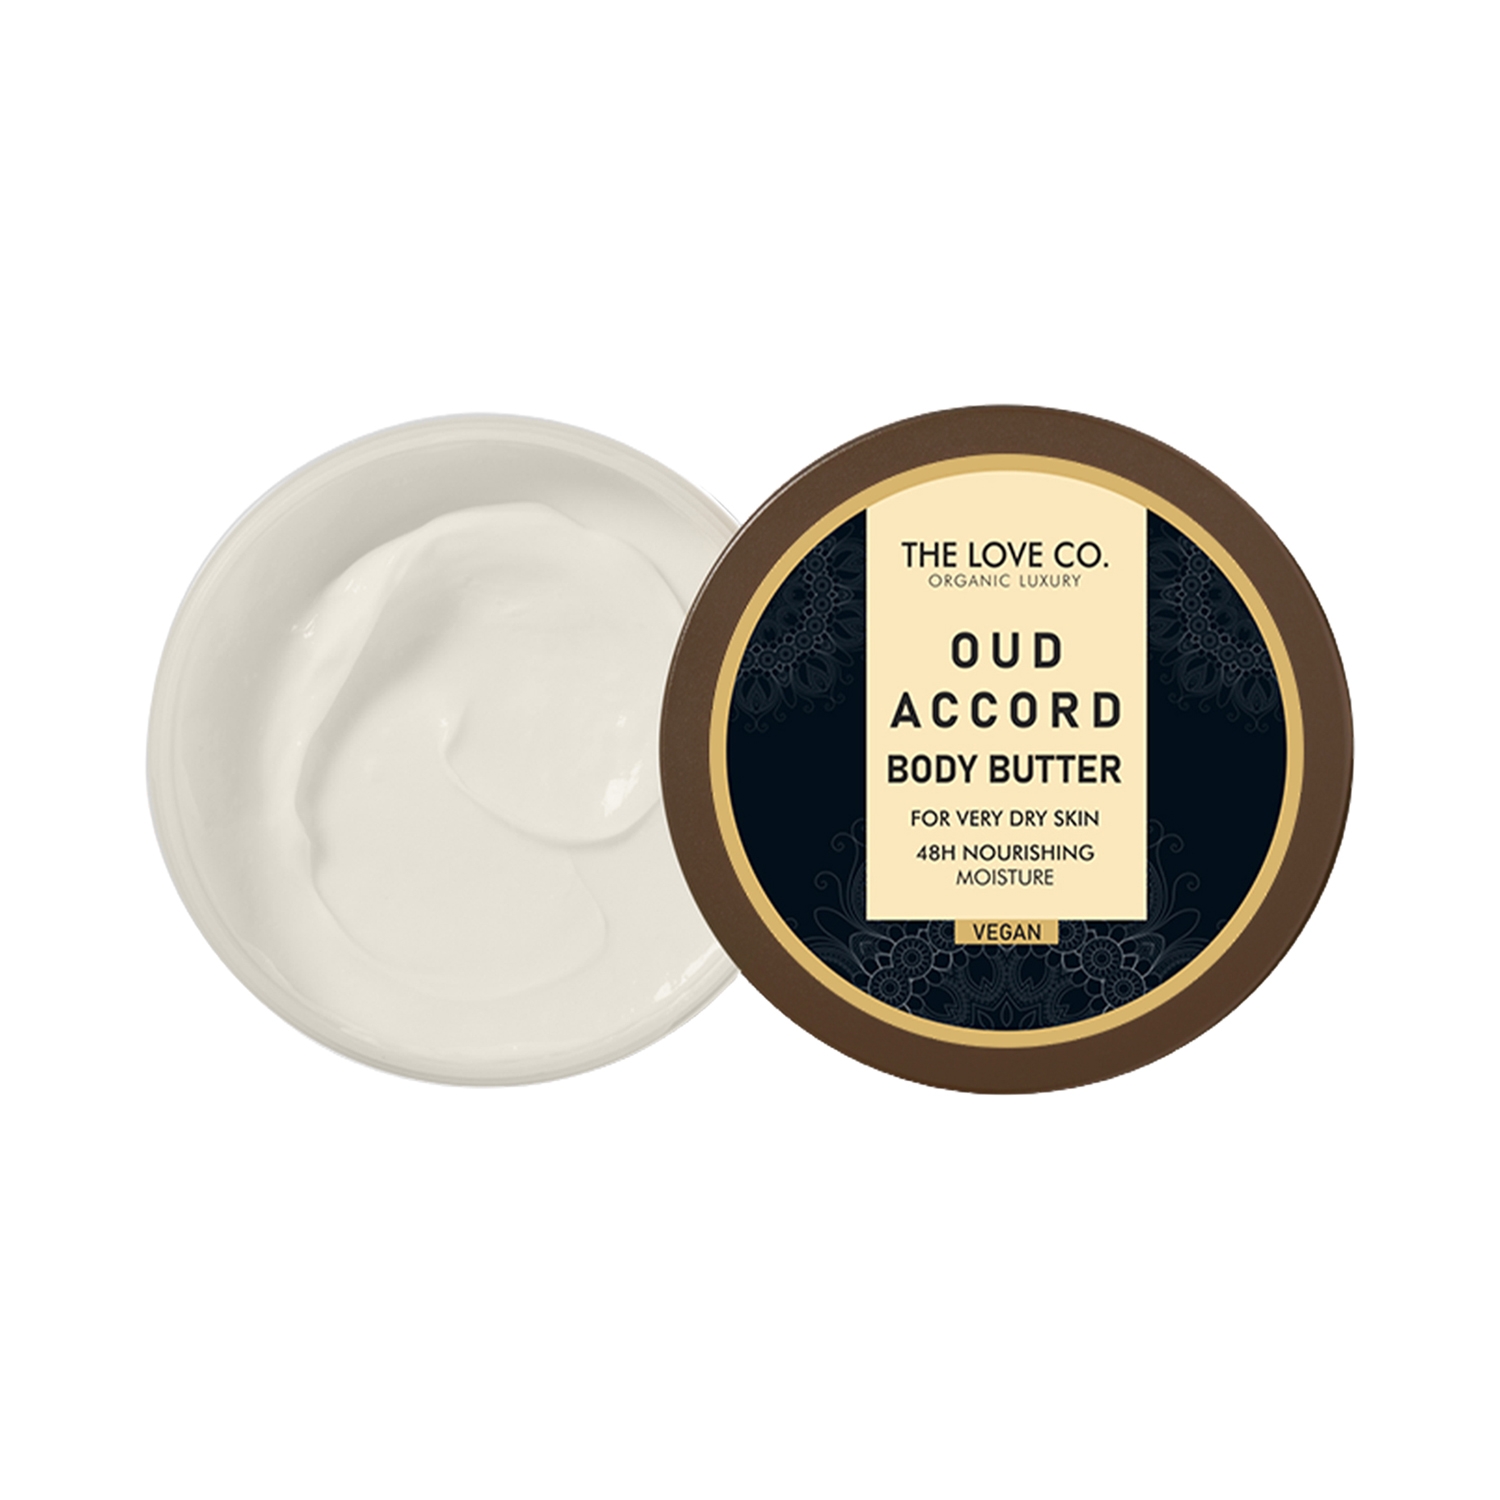 THE LOVE CO. | THE LOVE CO. Luxury Oud Accord Body Butter Deep Moisturization With Pure Shea Butter (200g)